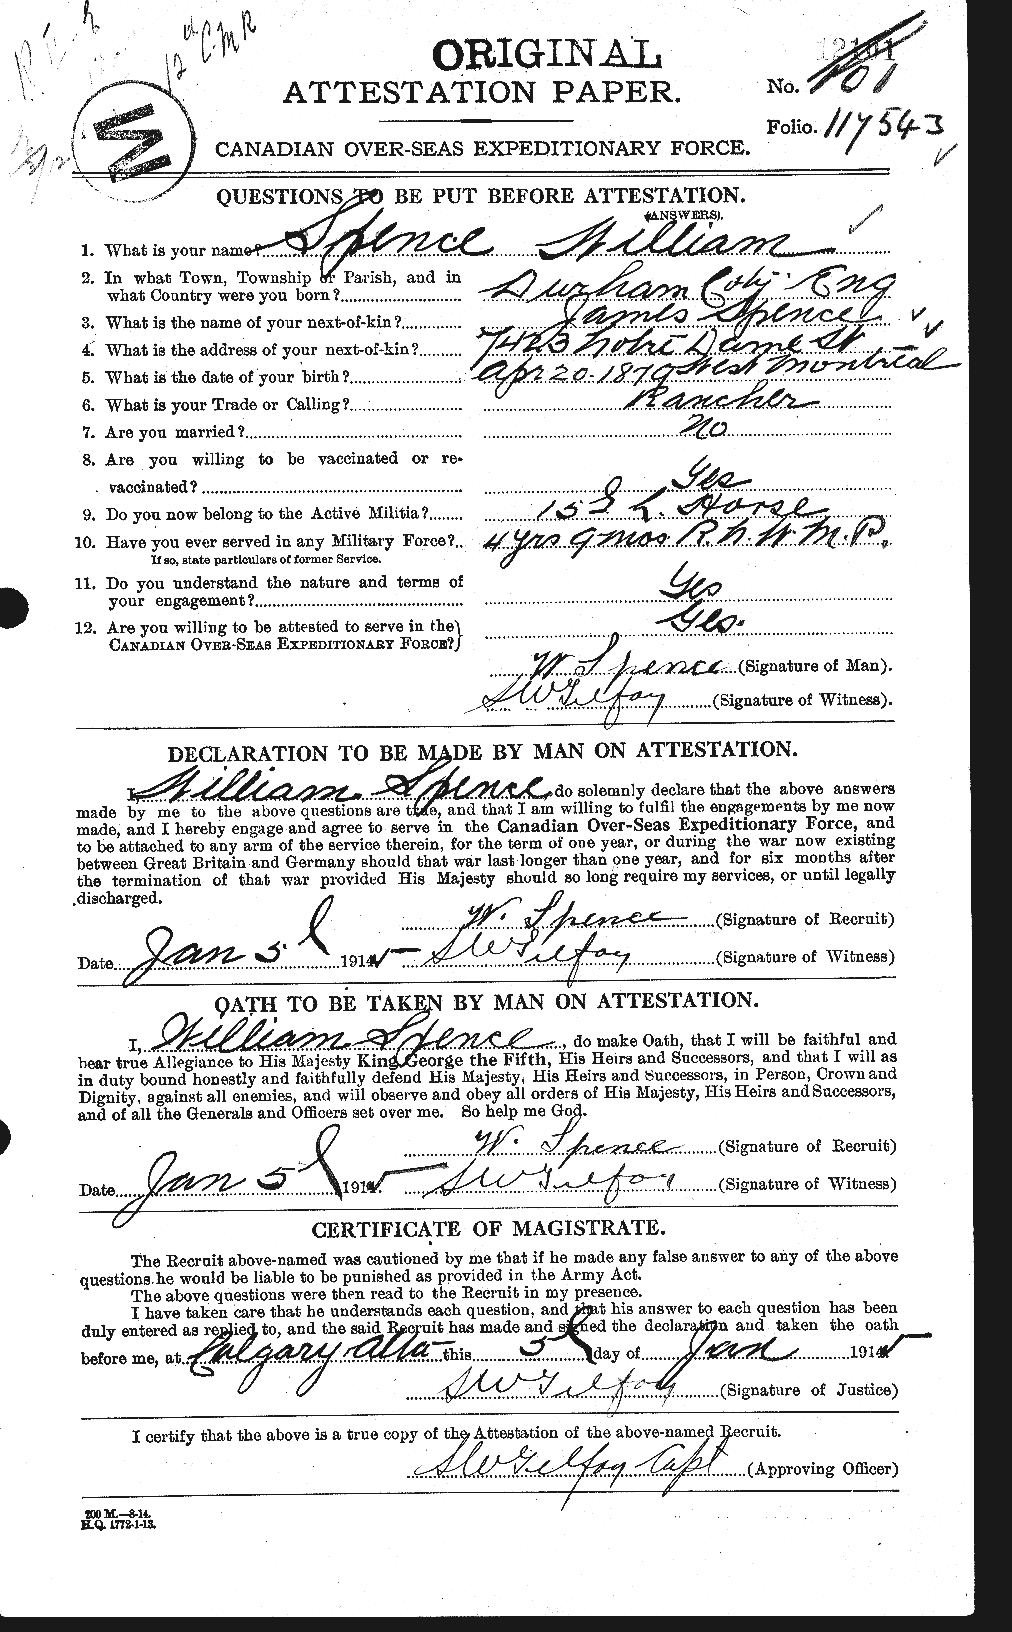 Personnel Records of the First World War - CEF 621442a